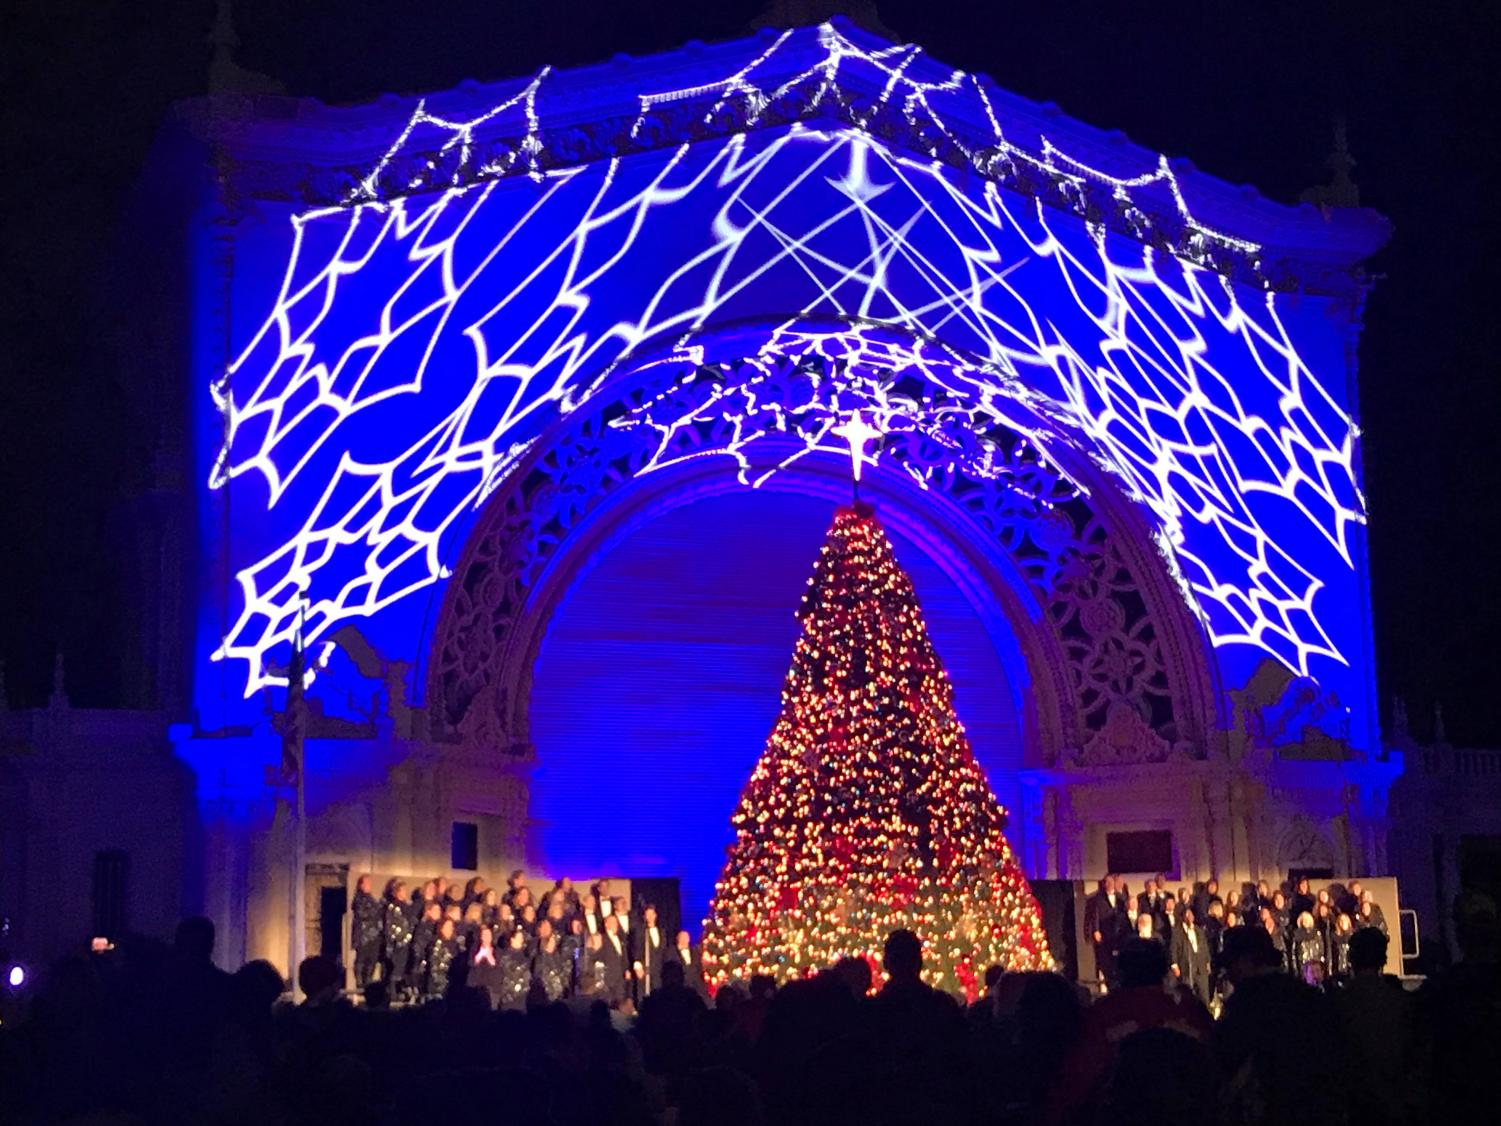 December Nights lights up Balboa Park’s sky again – The Daily Aztec